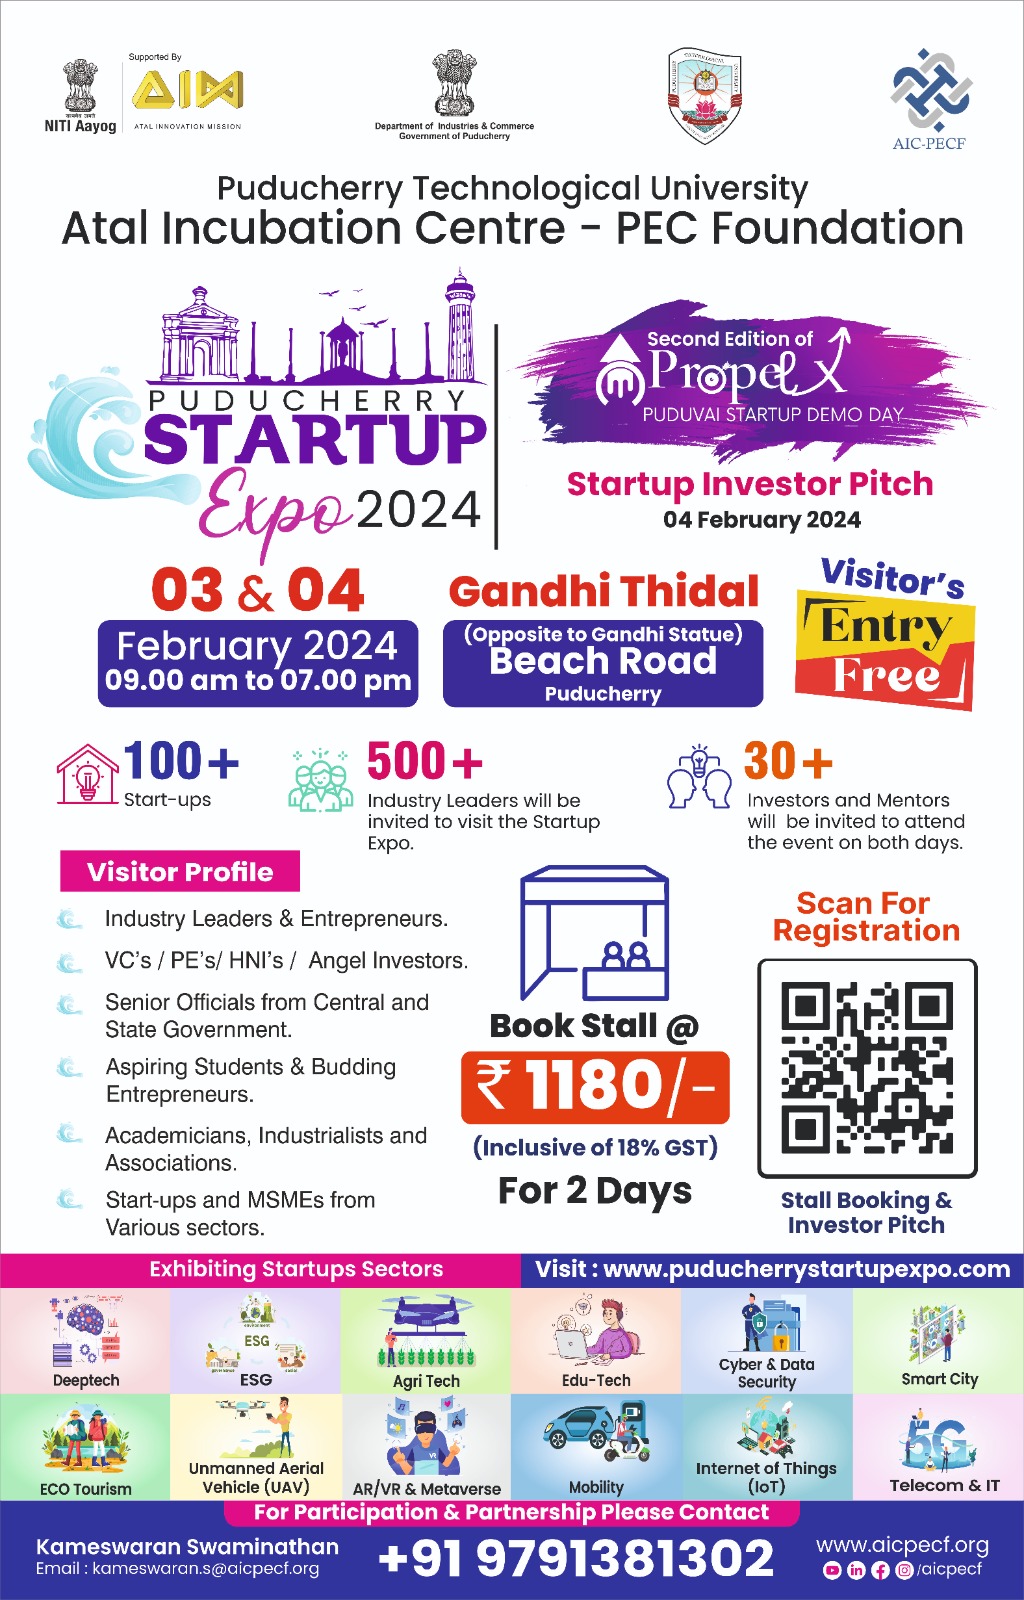 Puducherry Startup Expo 2024 for two days in Pondicherry dedicated to startups